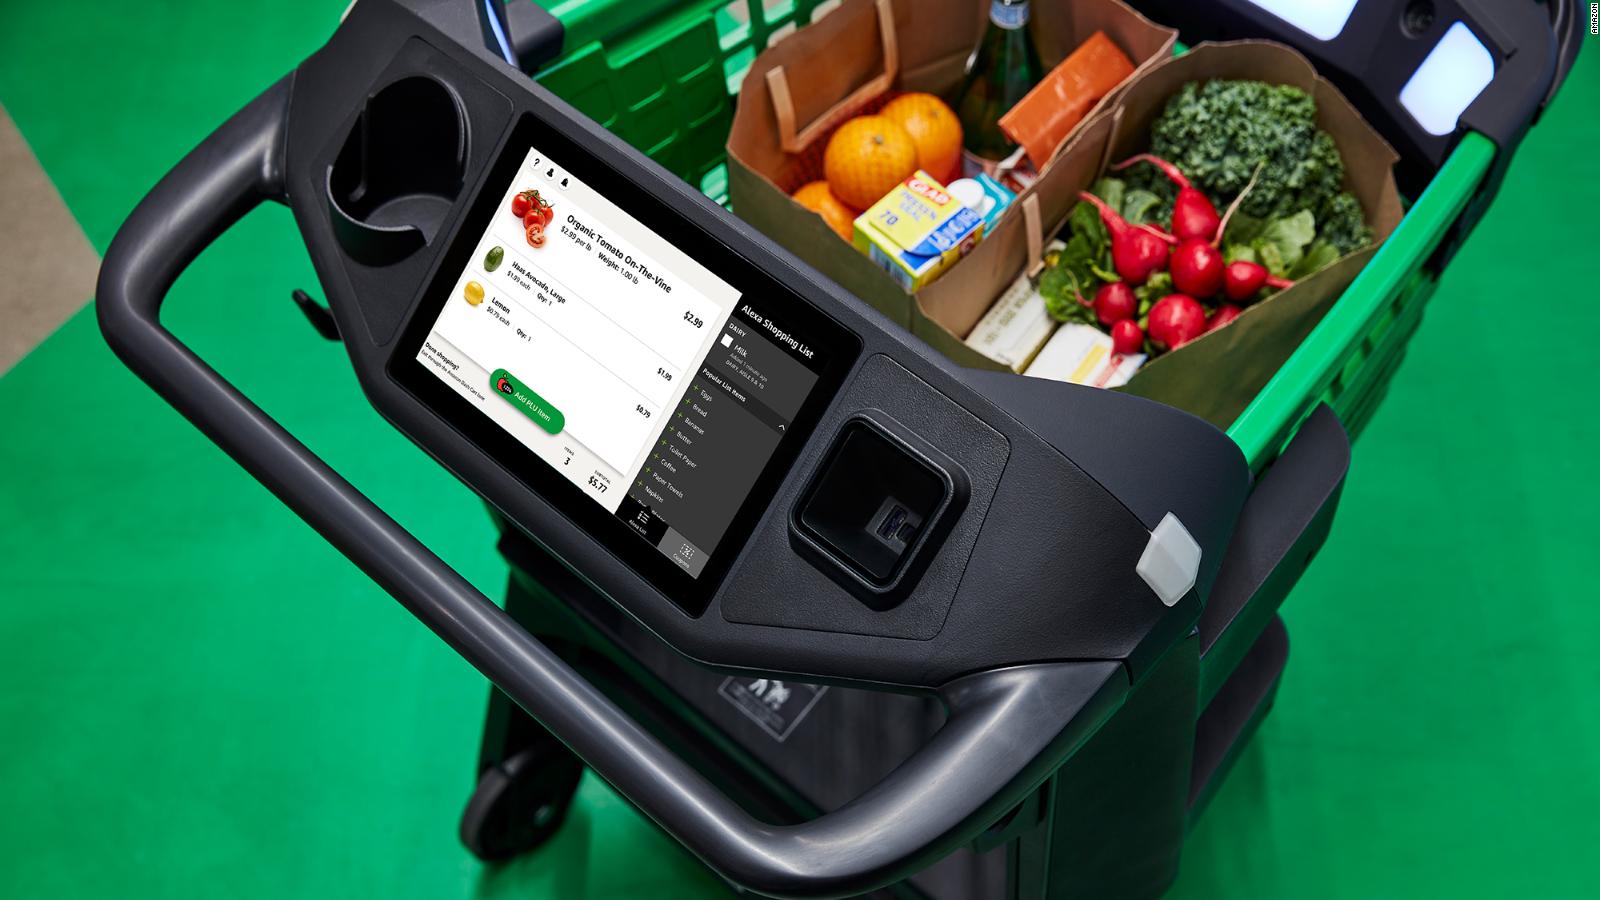 Amazon opens a new grocery store full of smart devices – TricksFast